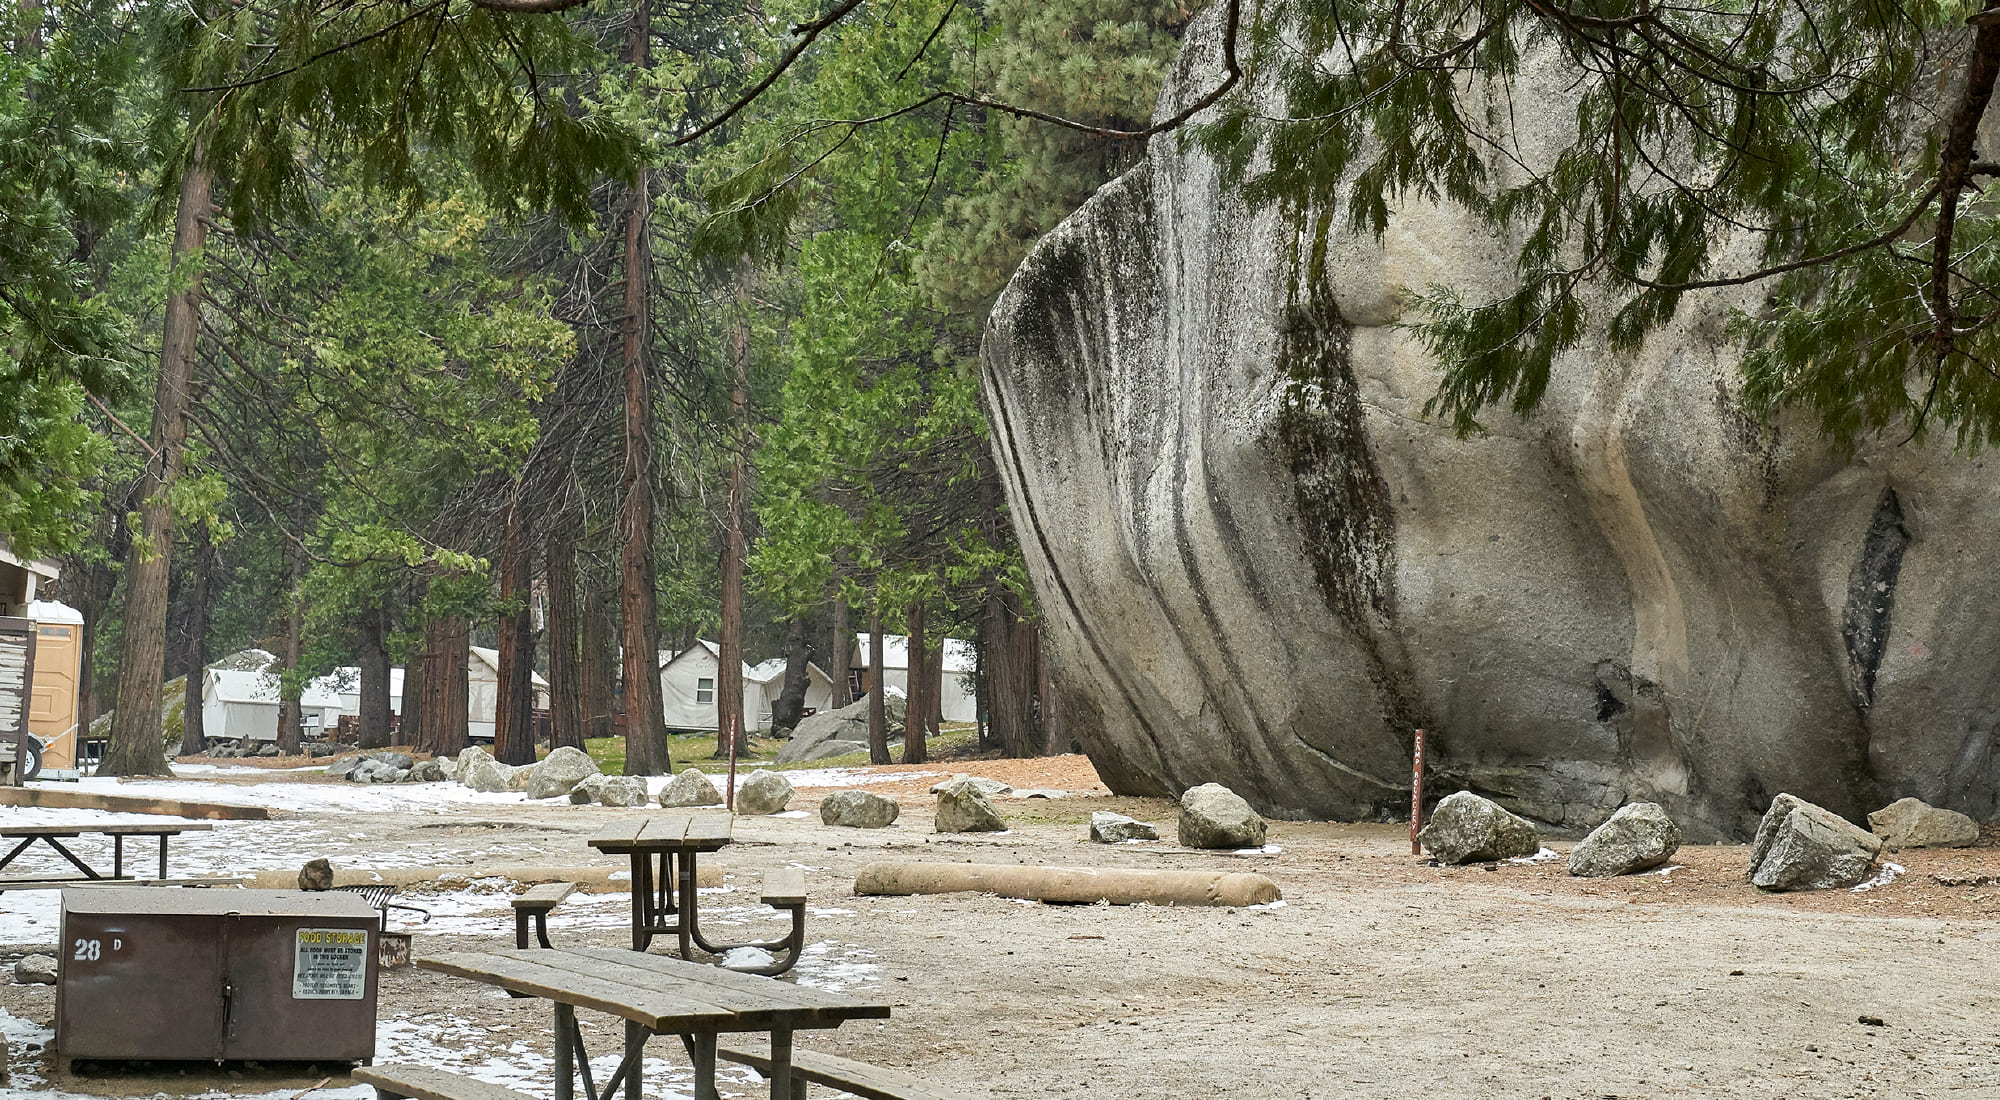 DISCOVERING DAYS IN YOSEMITE